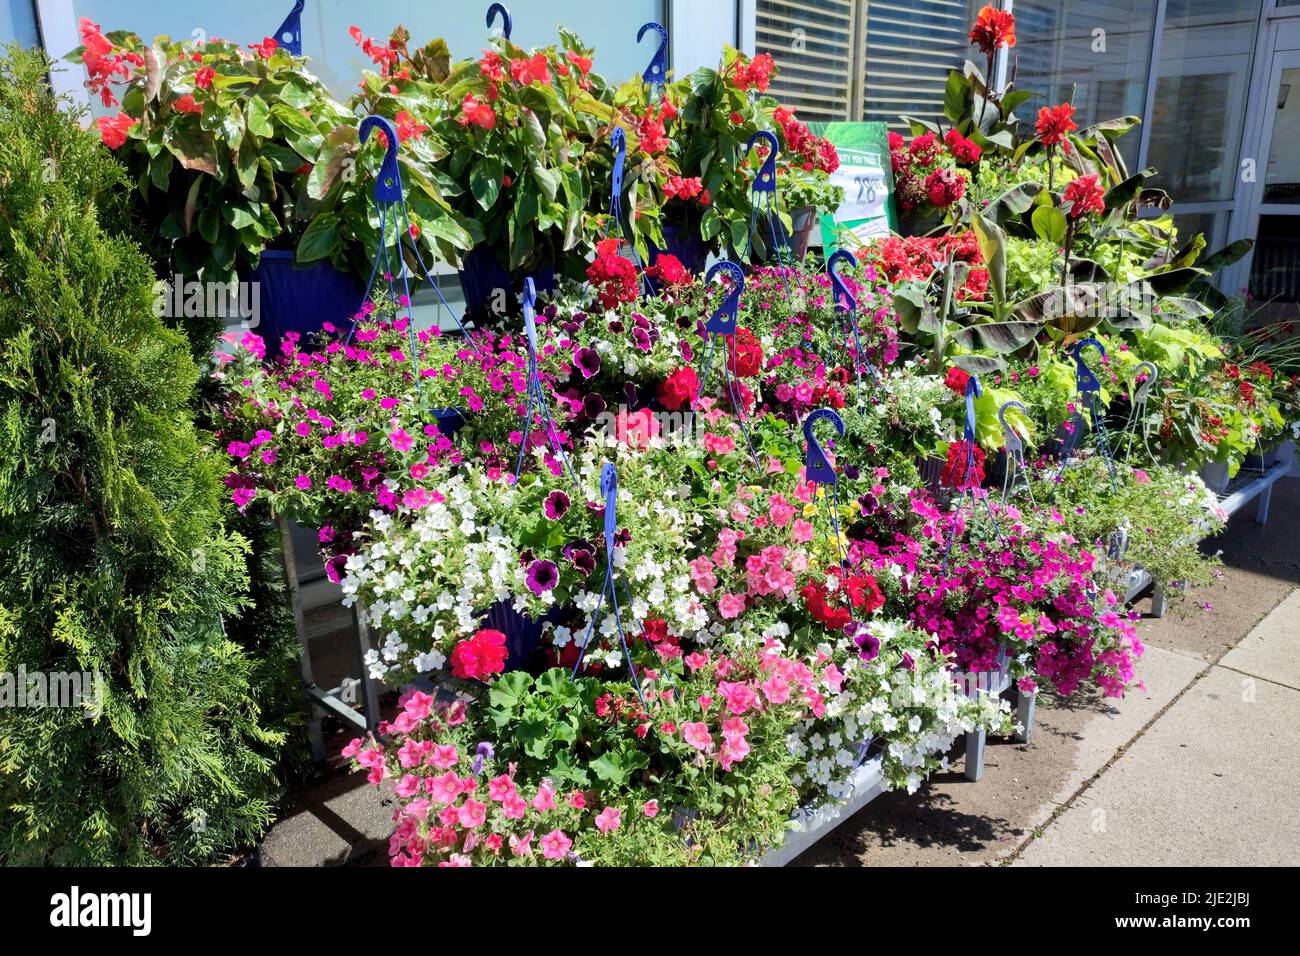 The Garden Centre at the supermarket.  Petunia in a pot. Different plants, flowers, seedlings, fertilizer, garden tool and pots Stock Photo